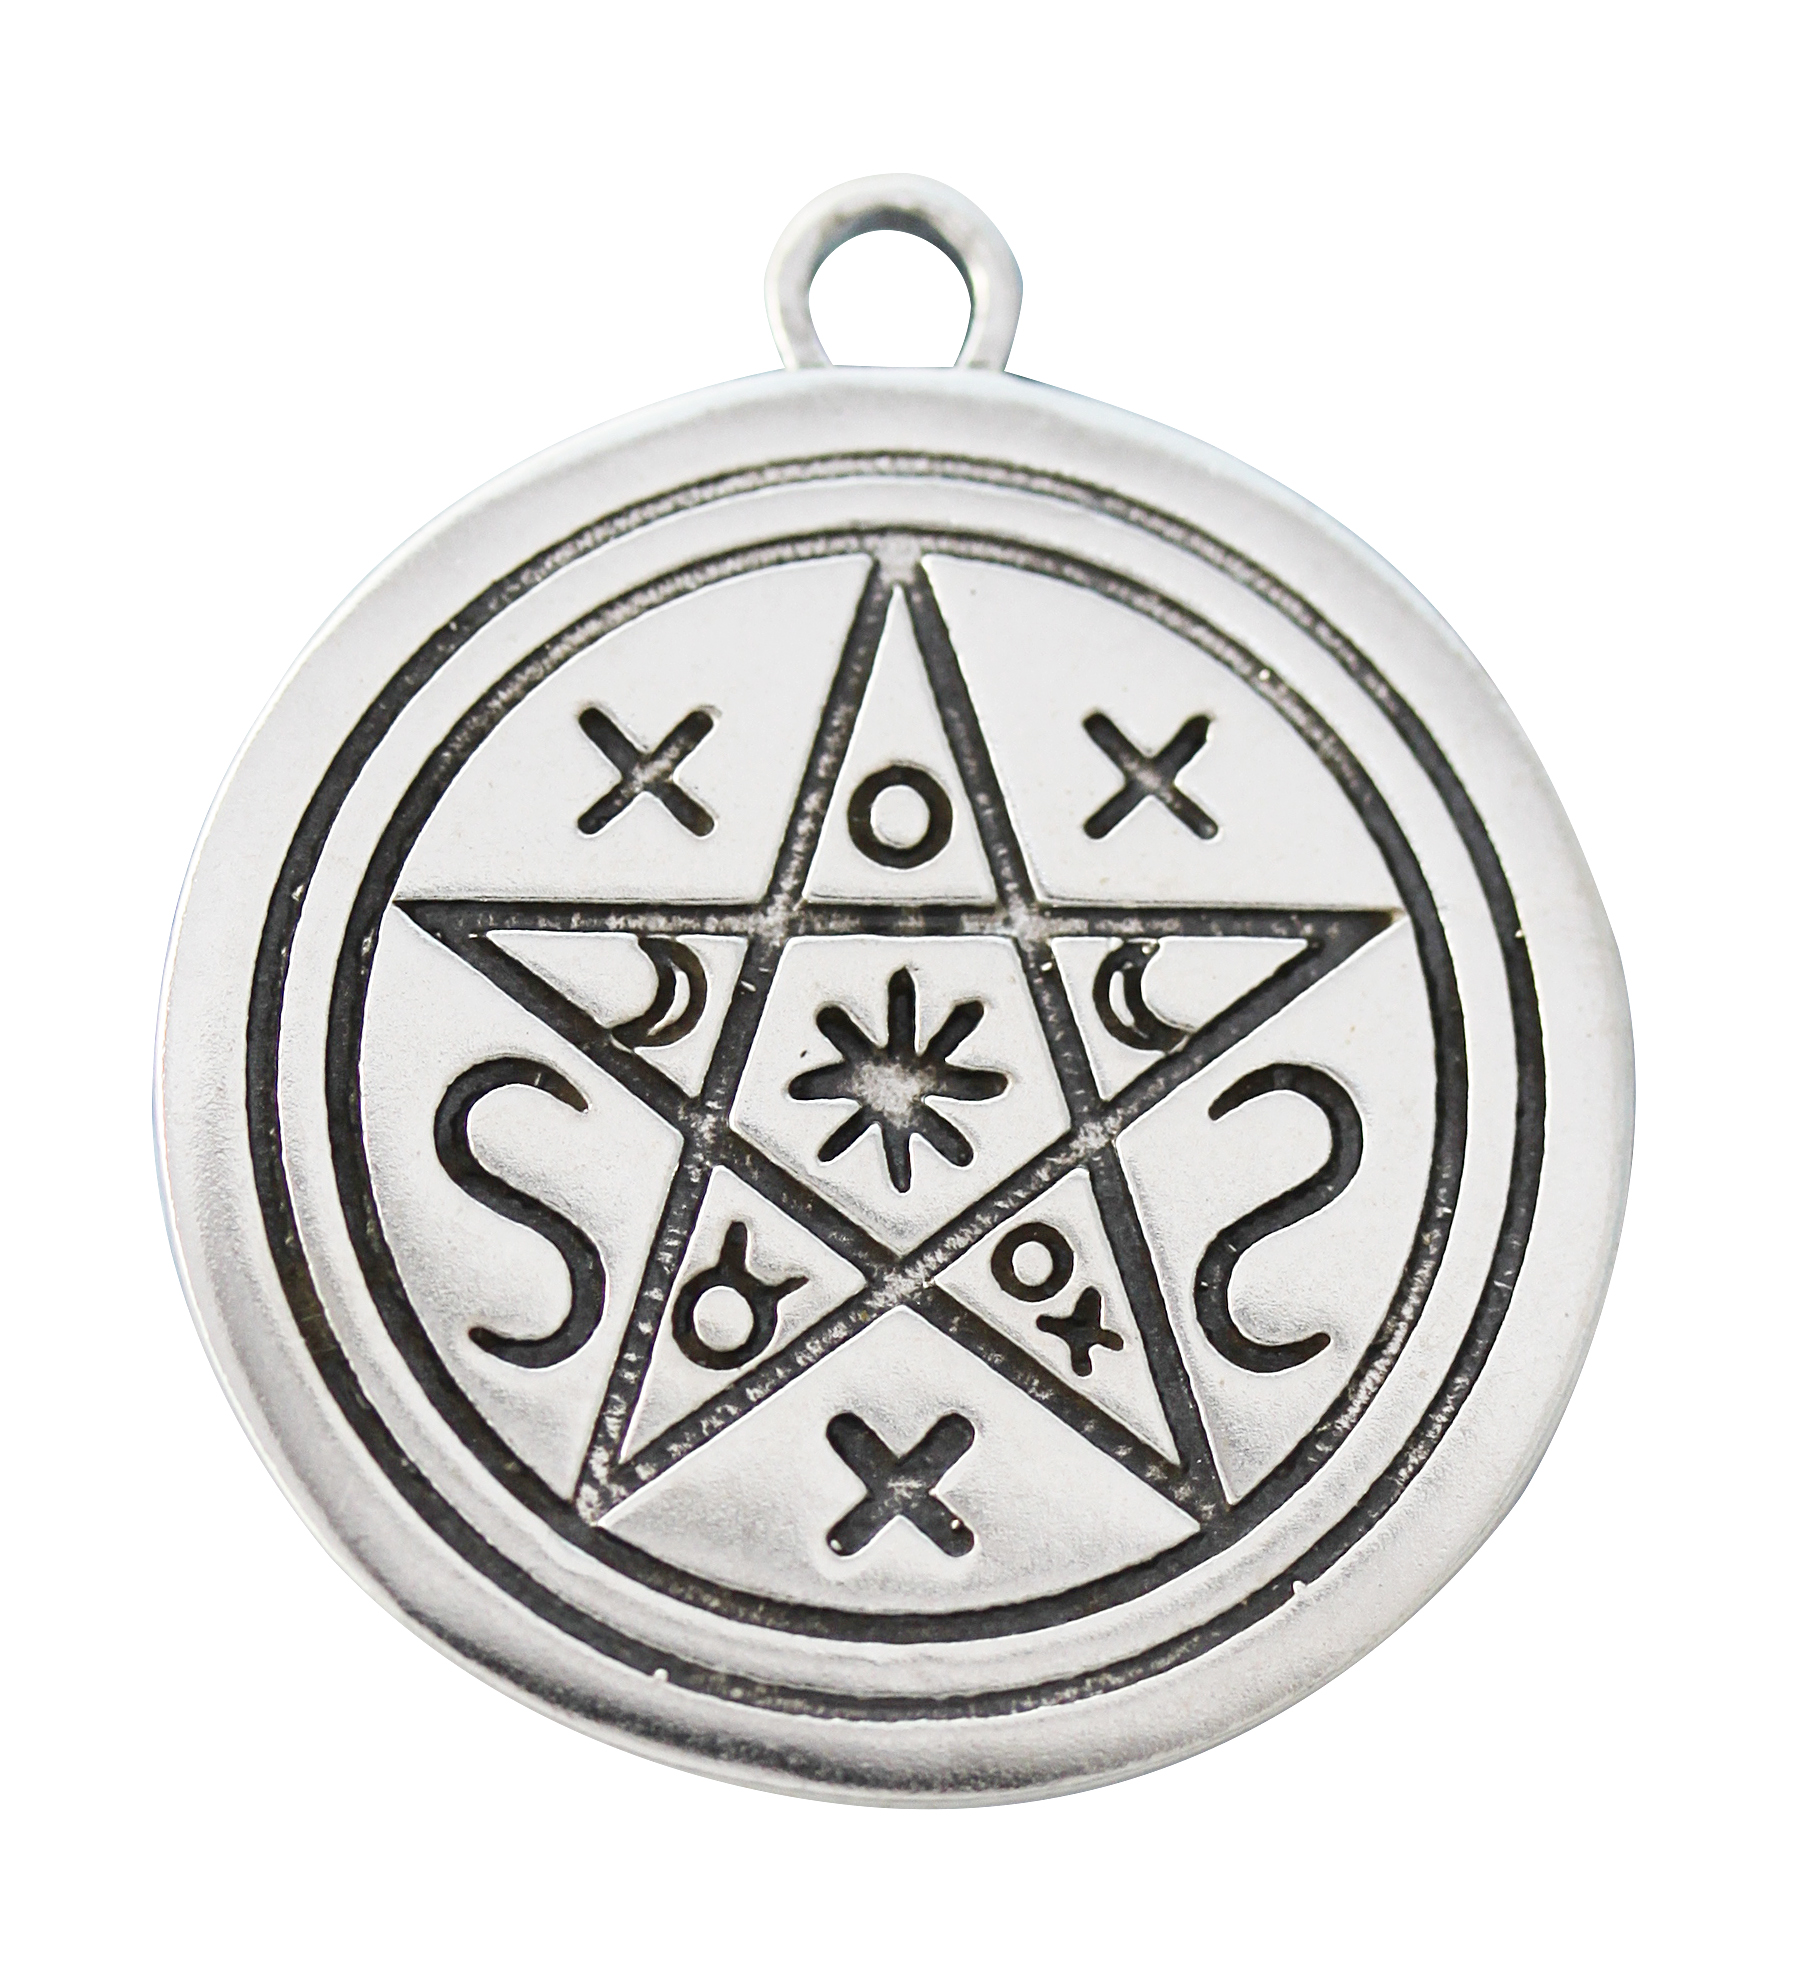 Pentacle of Shadows for Contact with Earth & Spirit